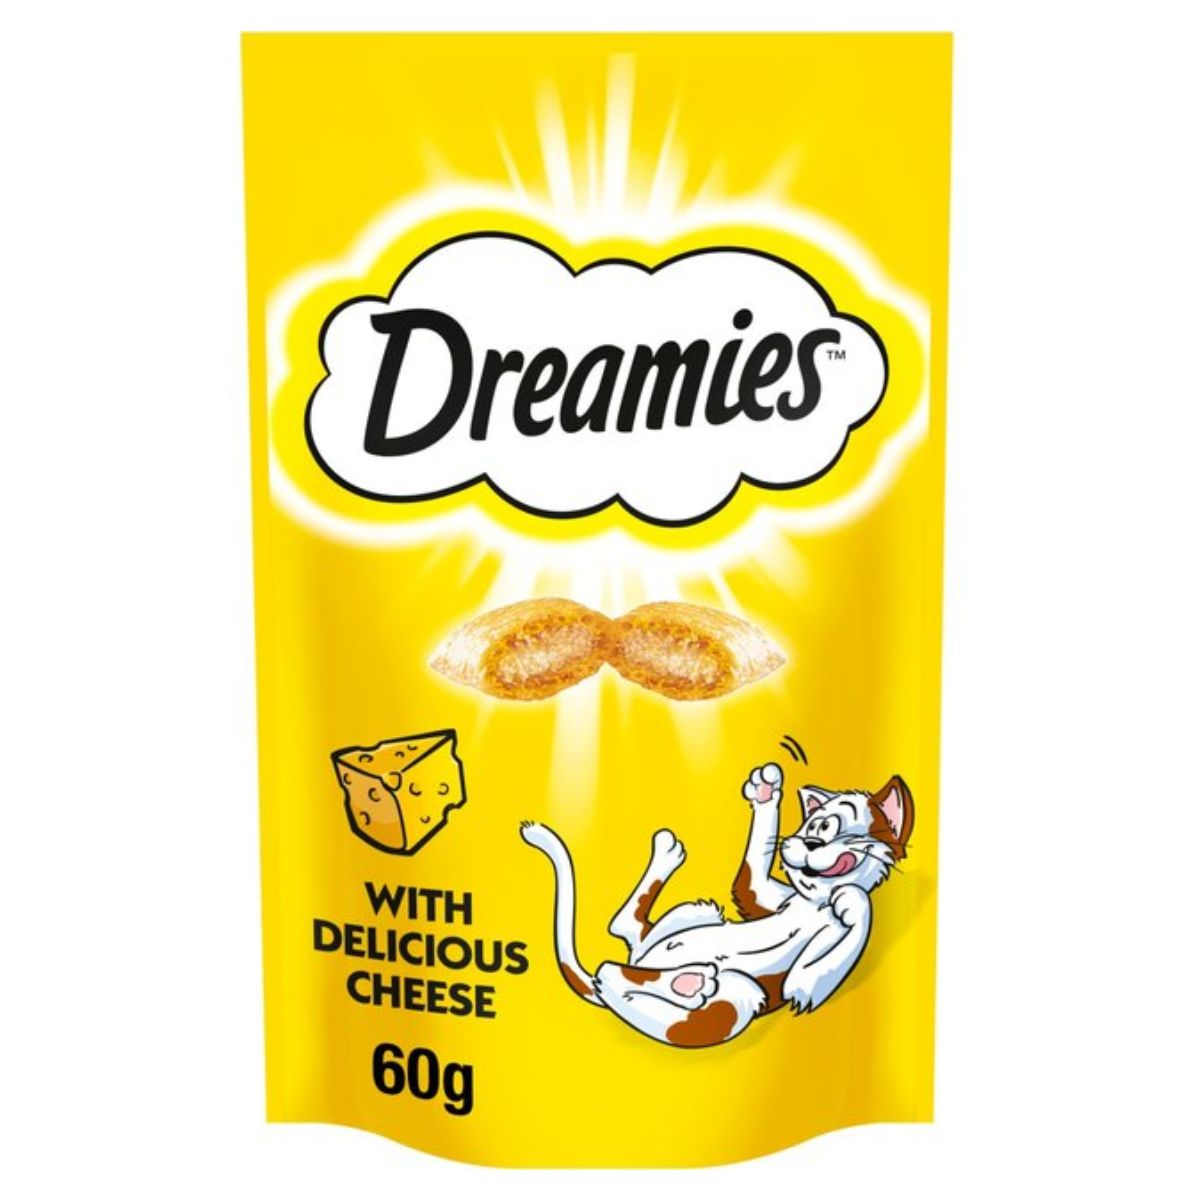 Dreamies - Cheese Cat Treats - 60g with delicious cheese.